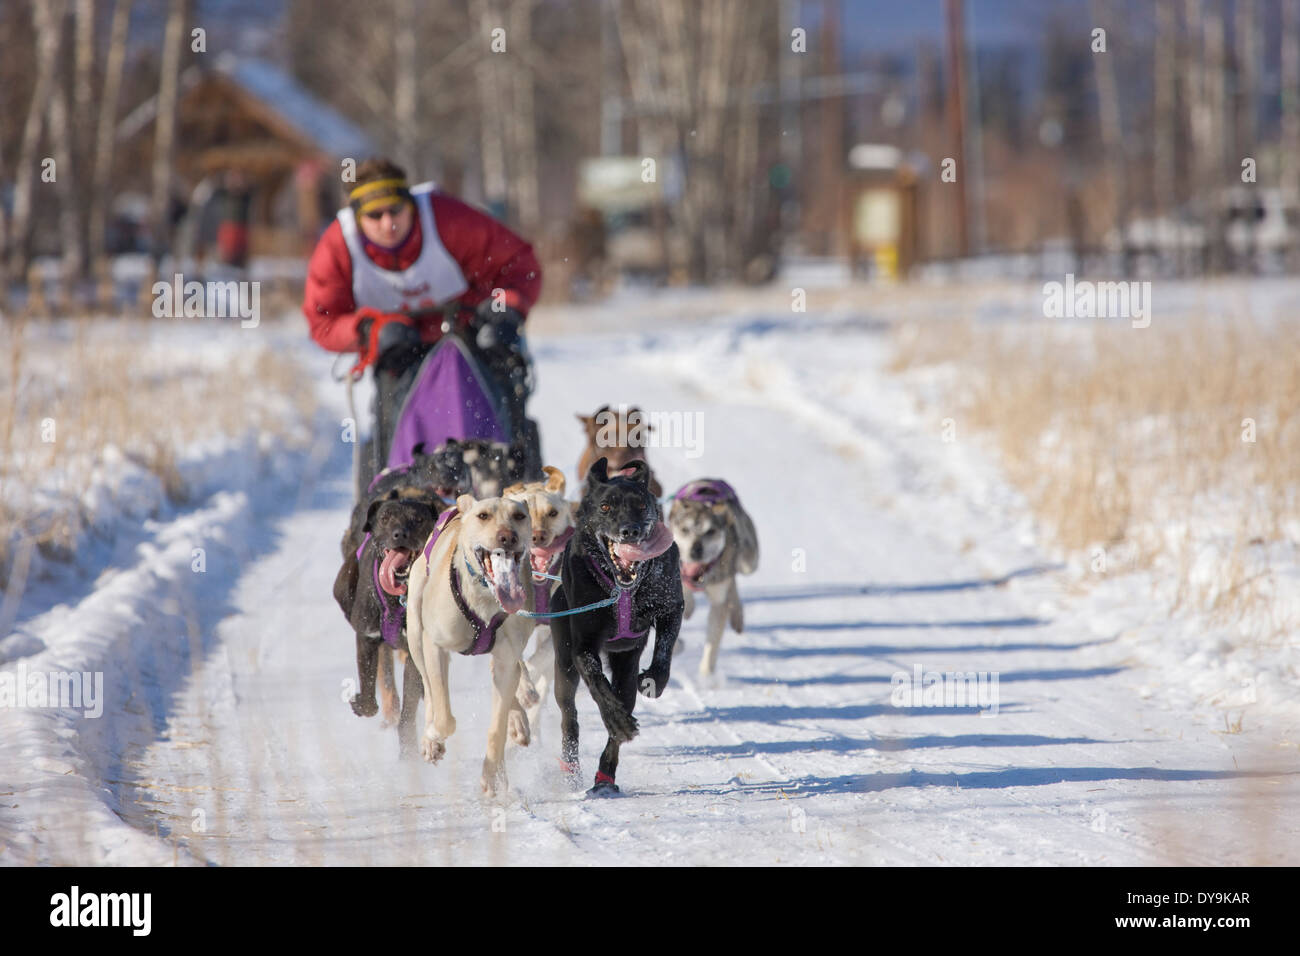 Ross Saunderson Races In The 2008 Open North American Championship Sled Dog Race Stock Photo